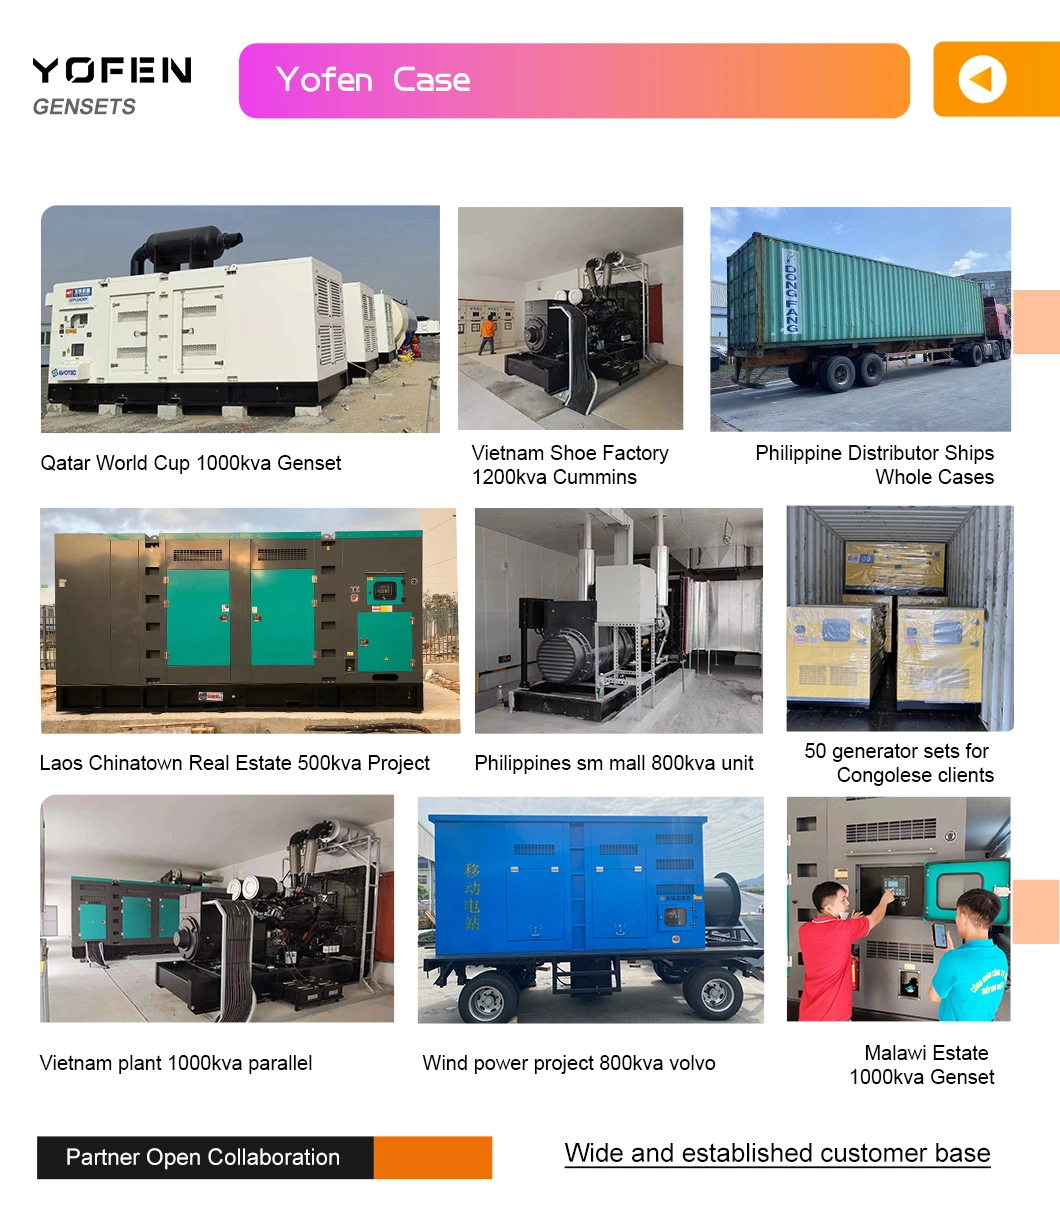 CE Certification Baudouin 20kw 25kw 25kVA 31.25kVA Three Phase Silent Power Electric Portable Inverter Diesel Generator Supply Weichaifor Yofen School/Factory